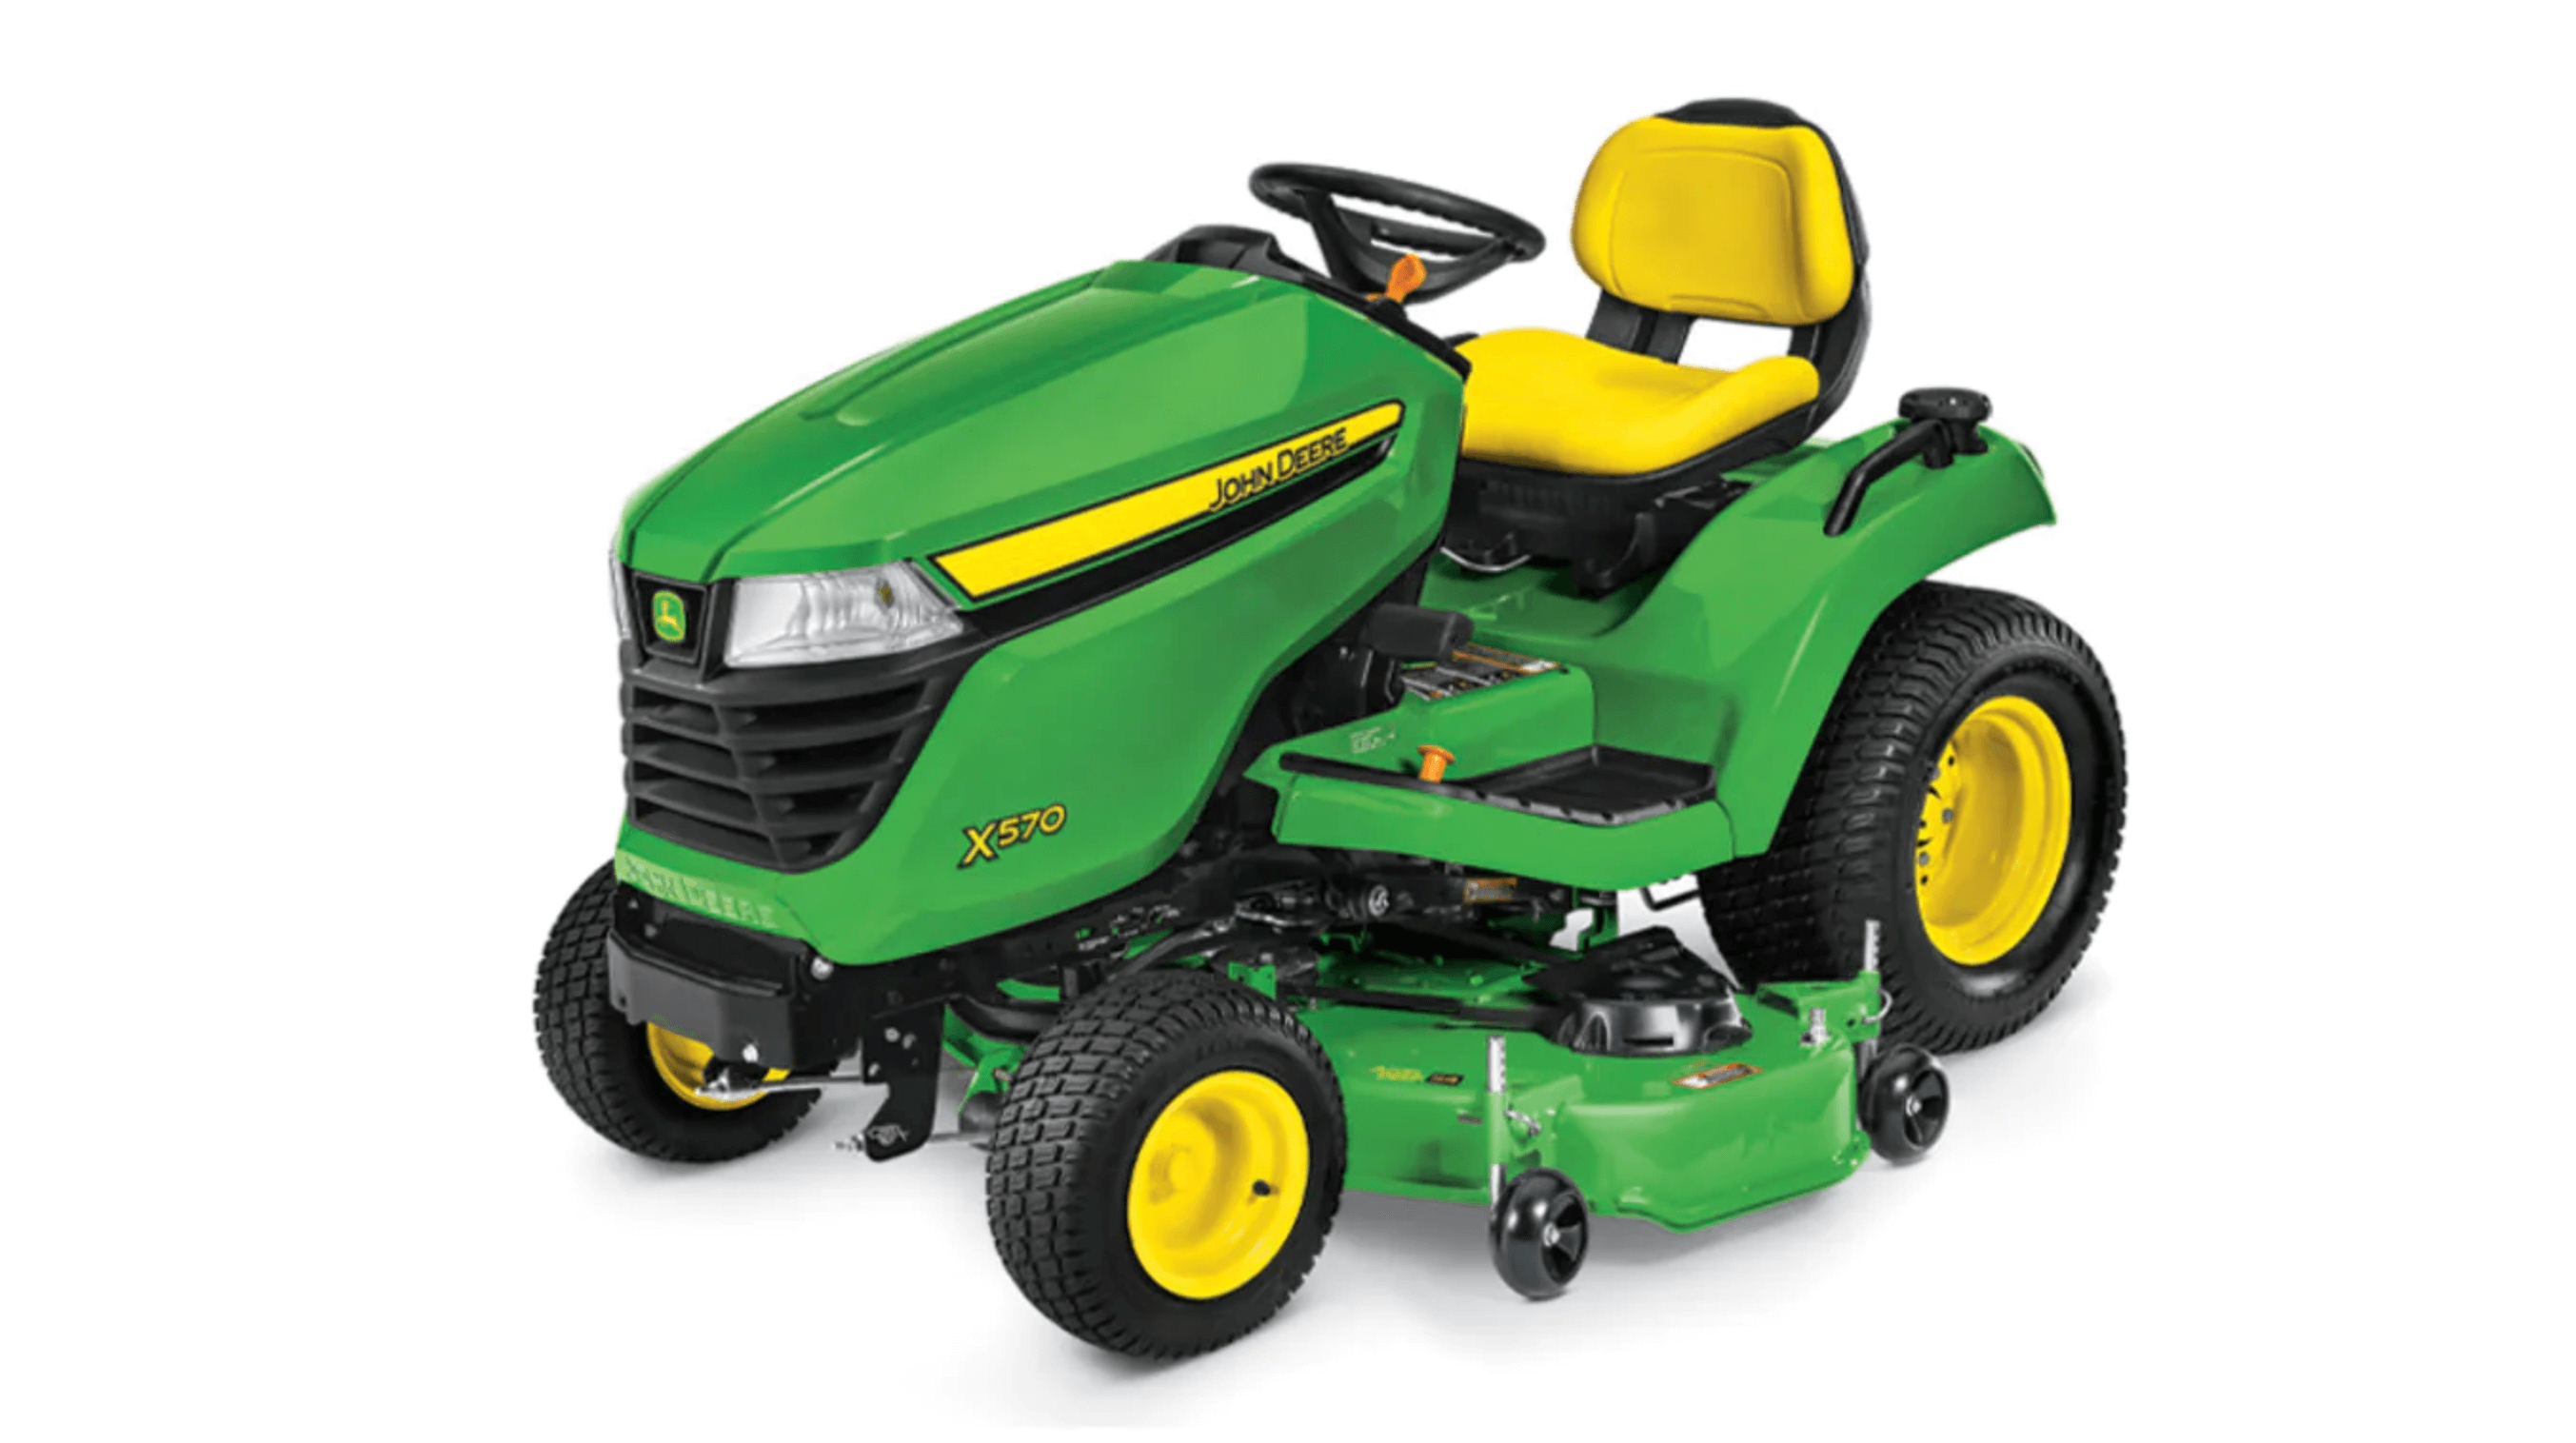 x570-lawn-tractor-54-in